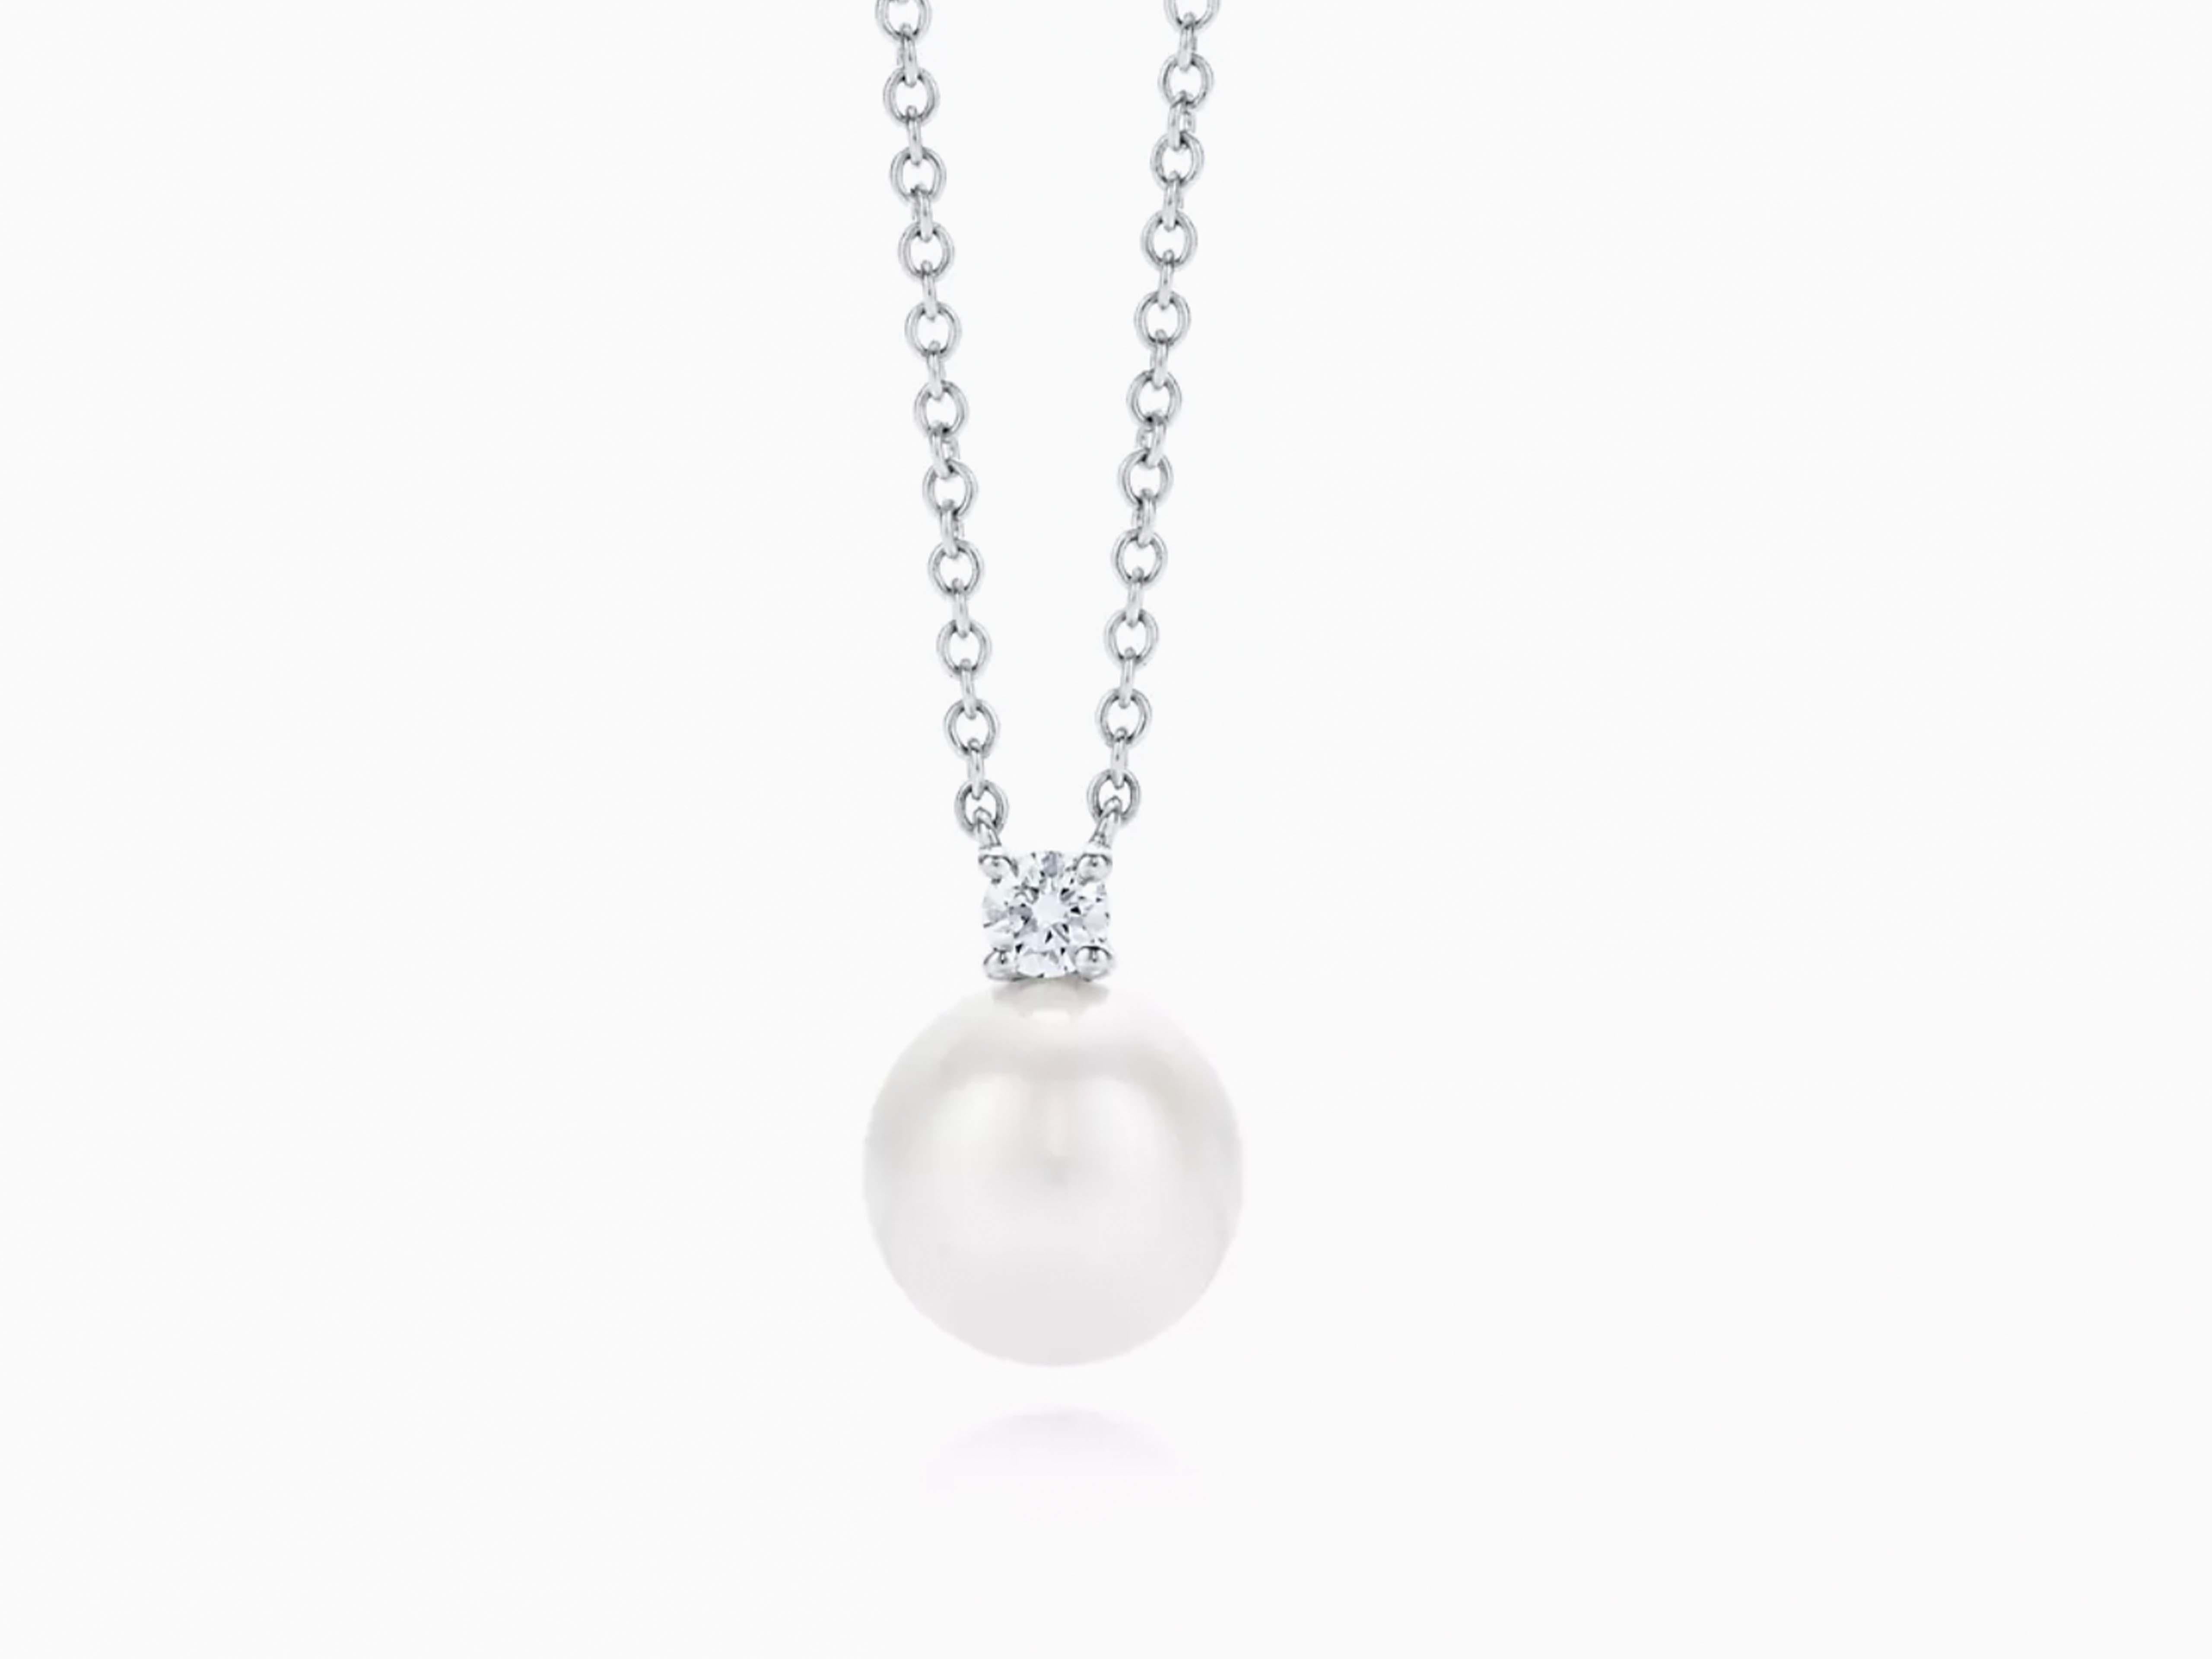 Pendant in 18k white gold with an Akoya cultured pearl and a round brilliant diamond. On a 16